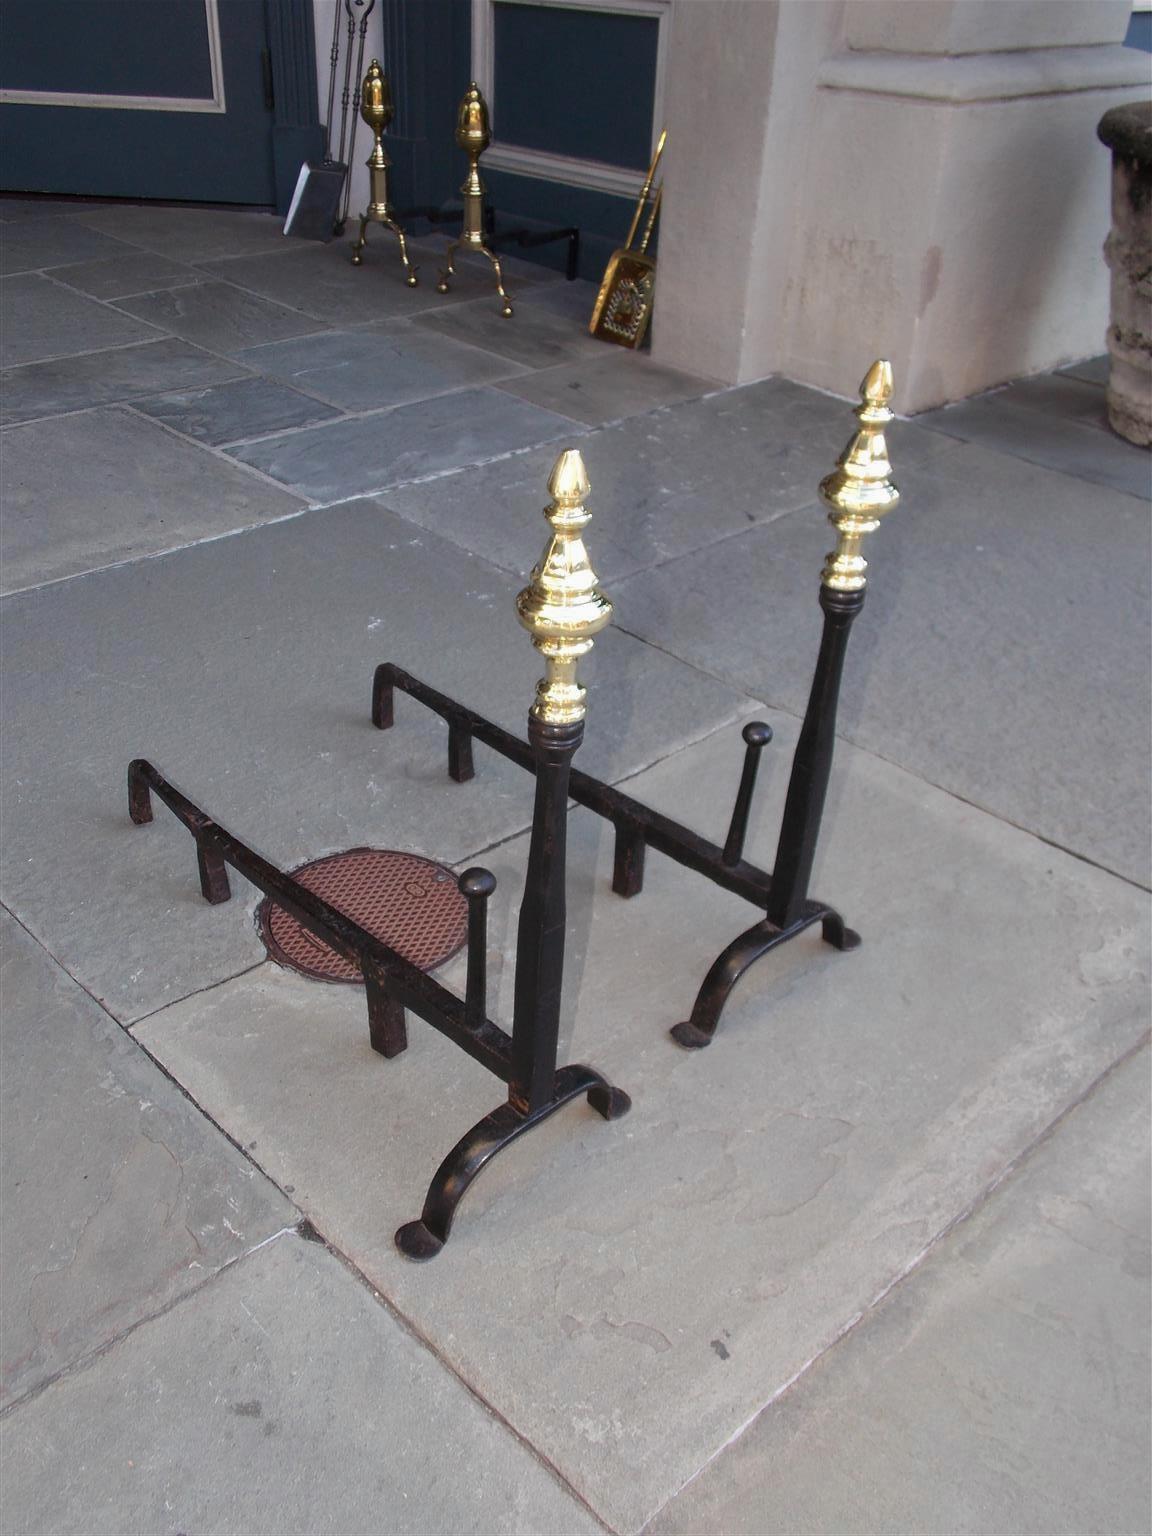 Pair of American wrought iron and brass faceted finial andirons with tapered columns, squared plinths, matching log stops, original dog legs, and resting on penny feet, Late 18th century.